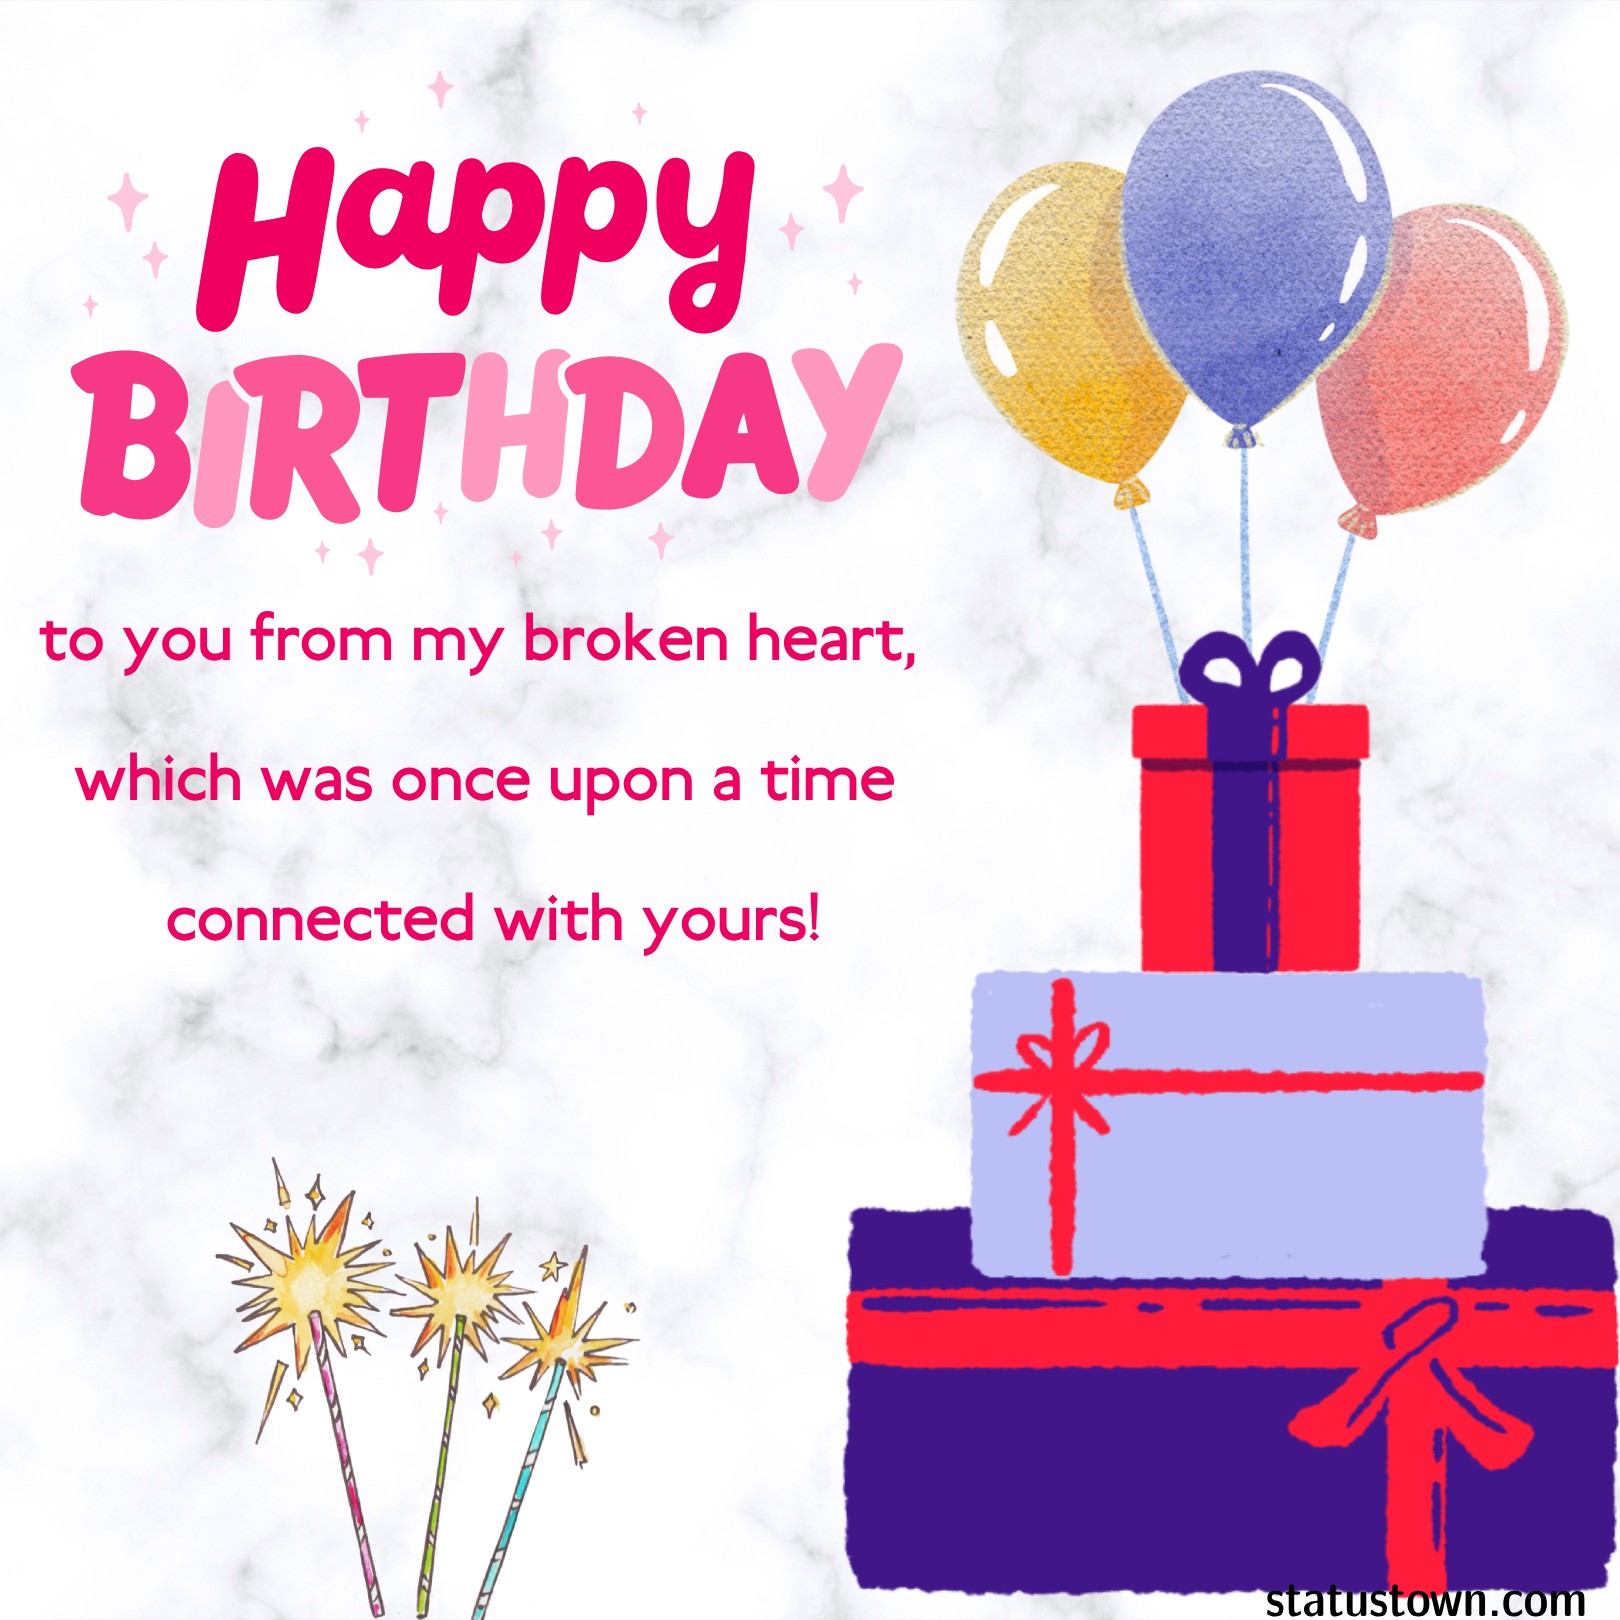 Happy birthday to you from my broken heart, which was once upon a time connected with yours! - Birthday Wishes Ex-Girlfriend